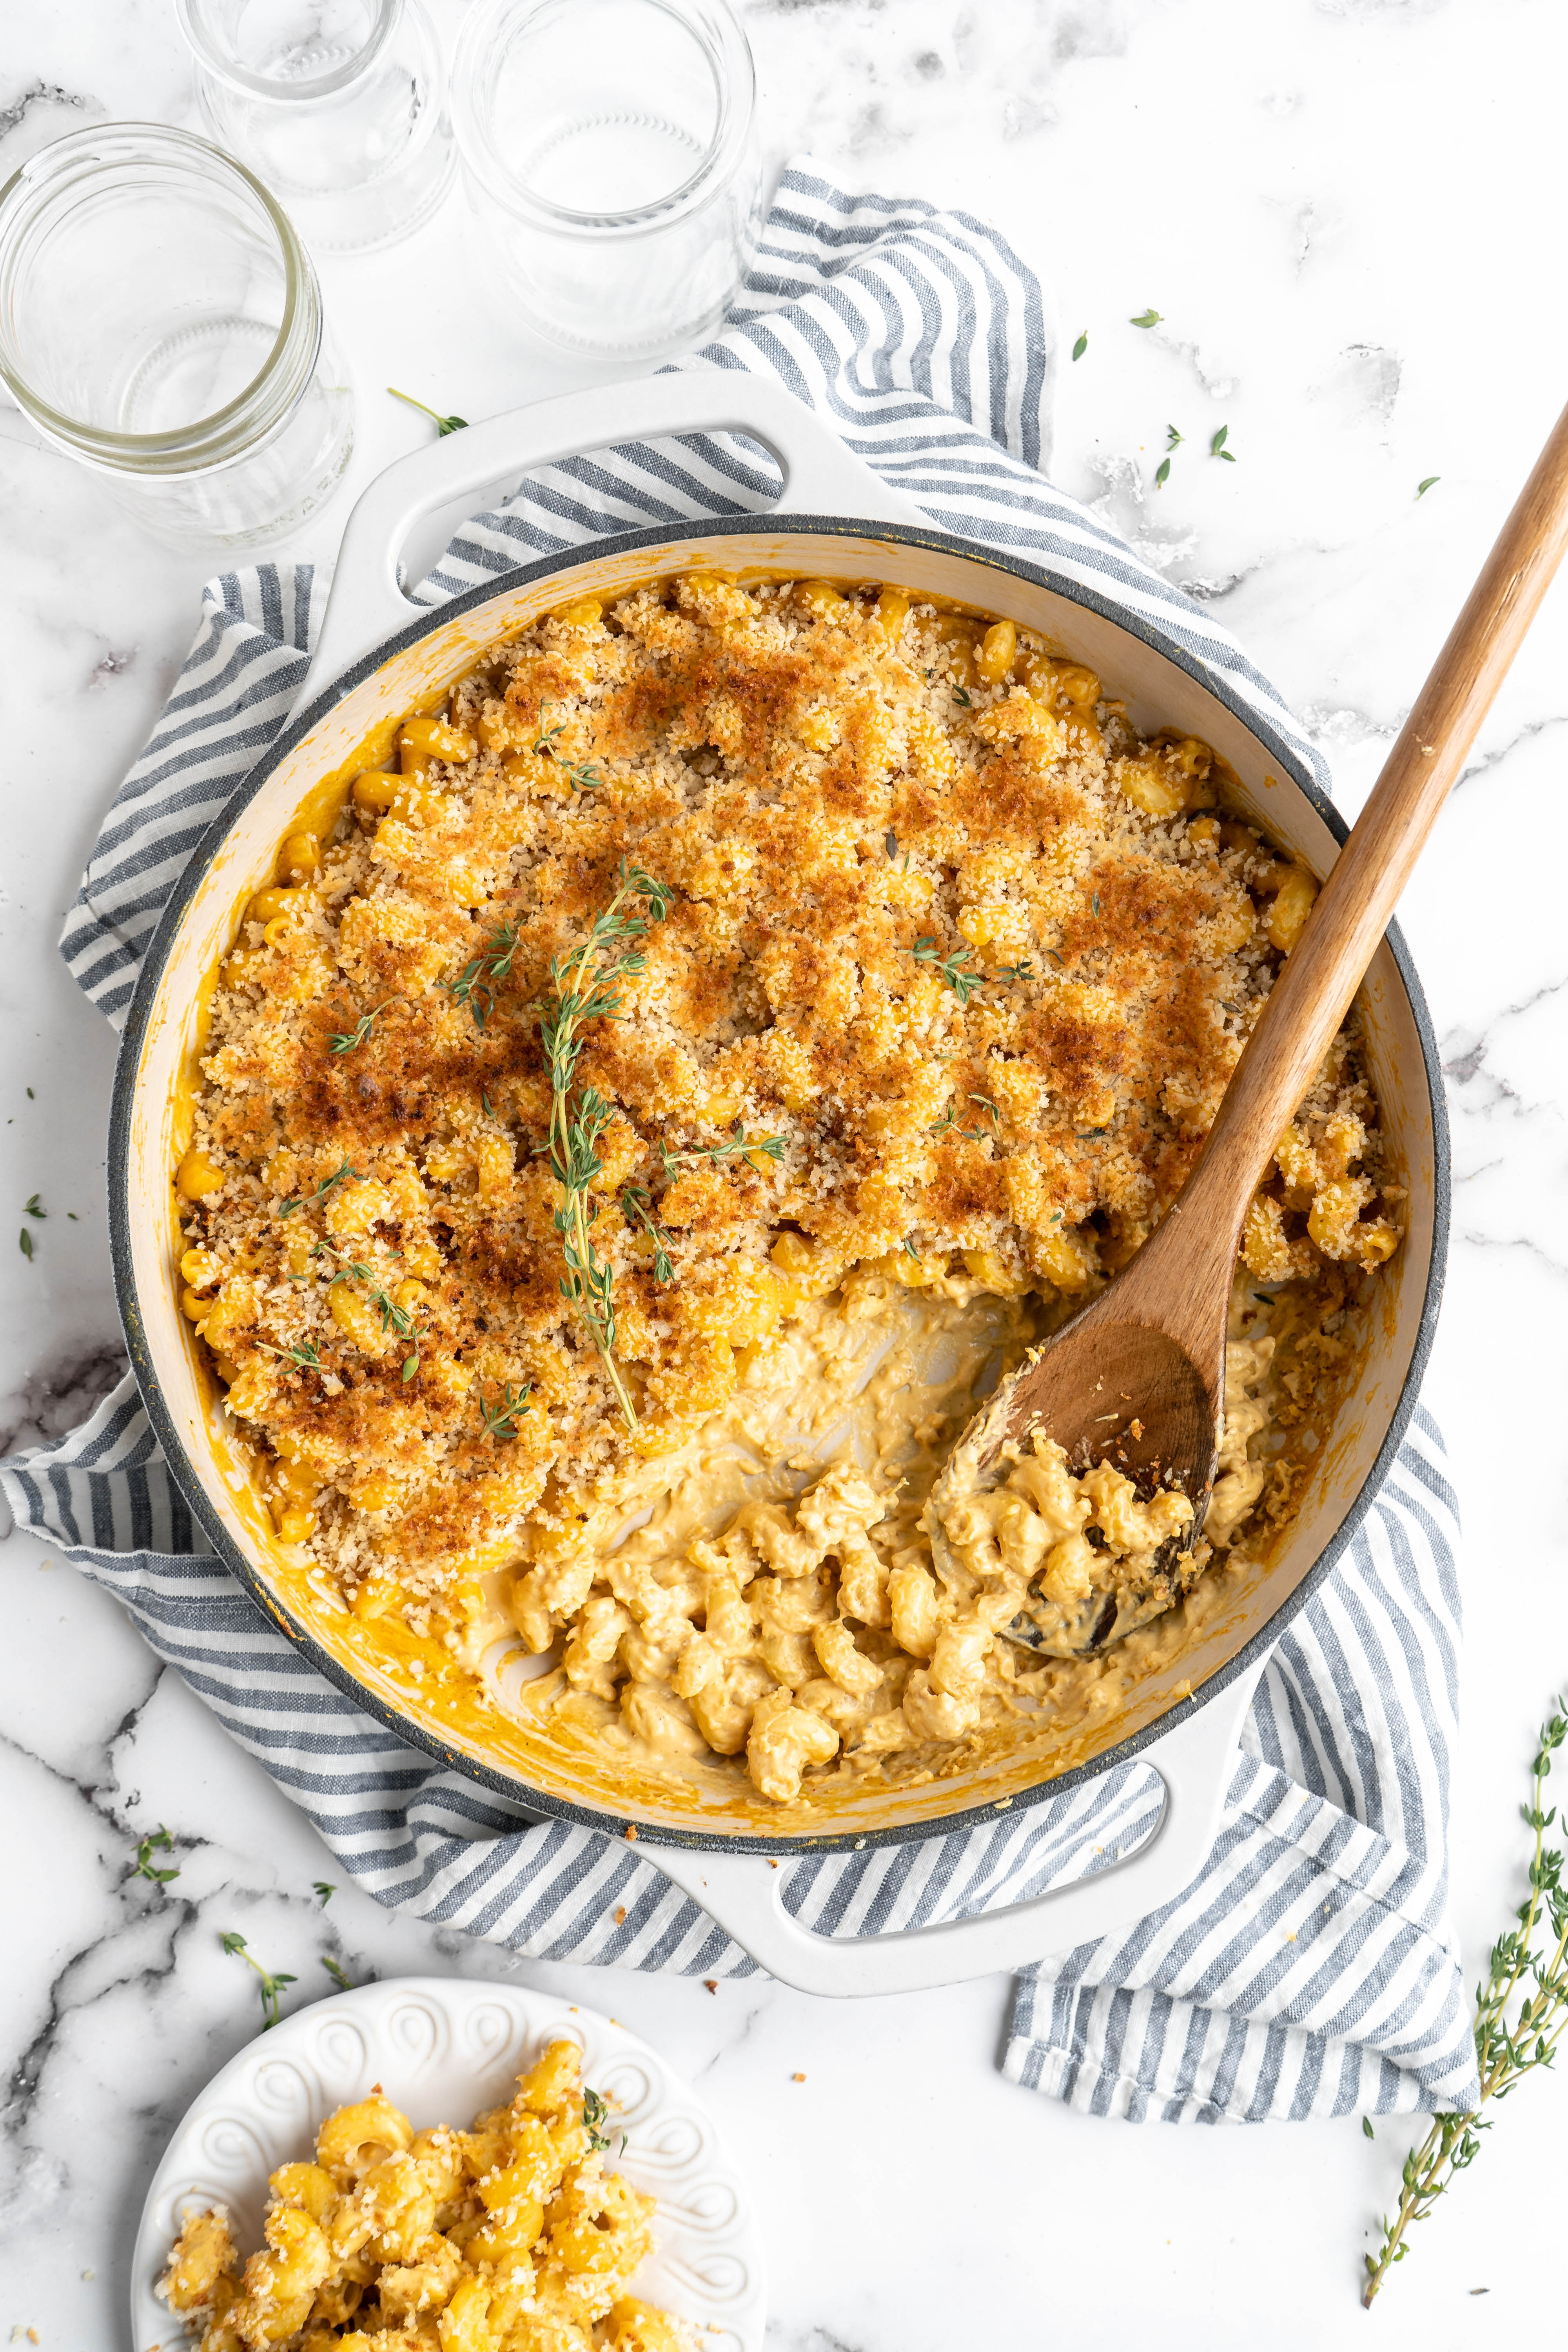 Baked vegan mac and cheese in skillet with wooden spoon